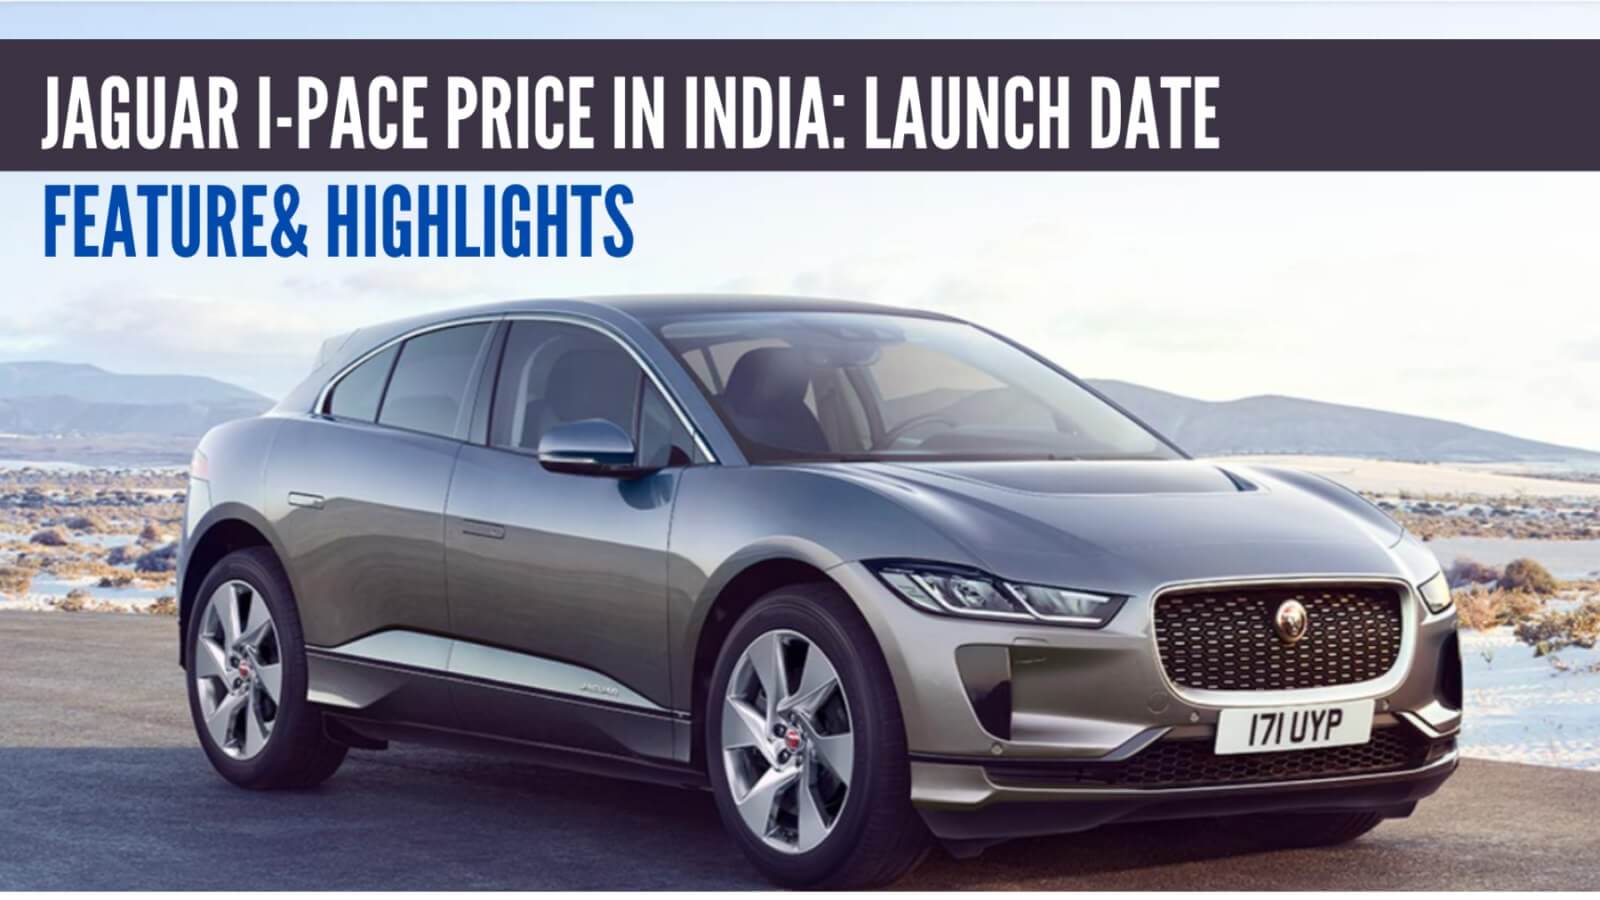 https://e-vehicleinfo.com/jaguar-i-pace-price-in-india-launch-date-feature-highlights/